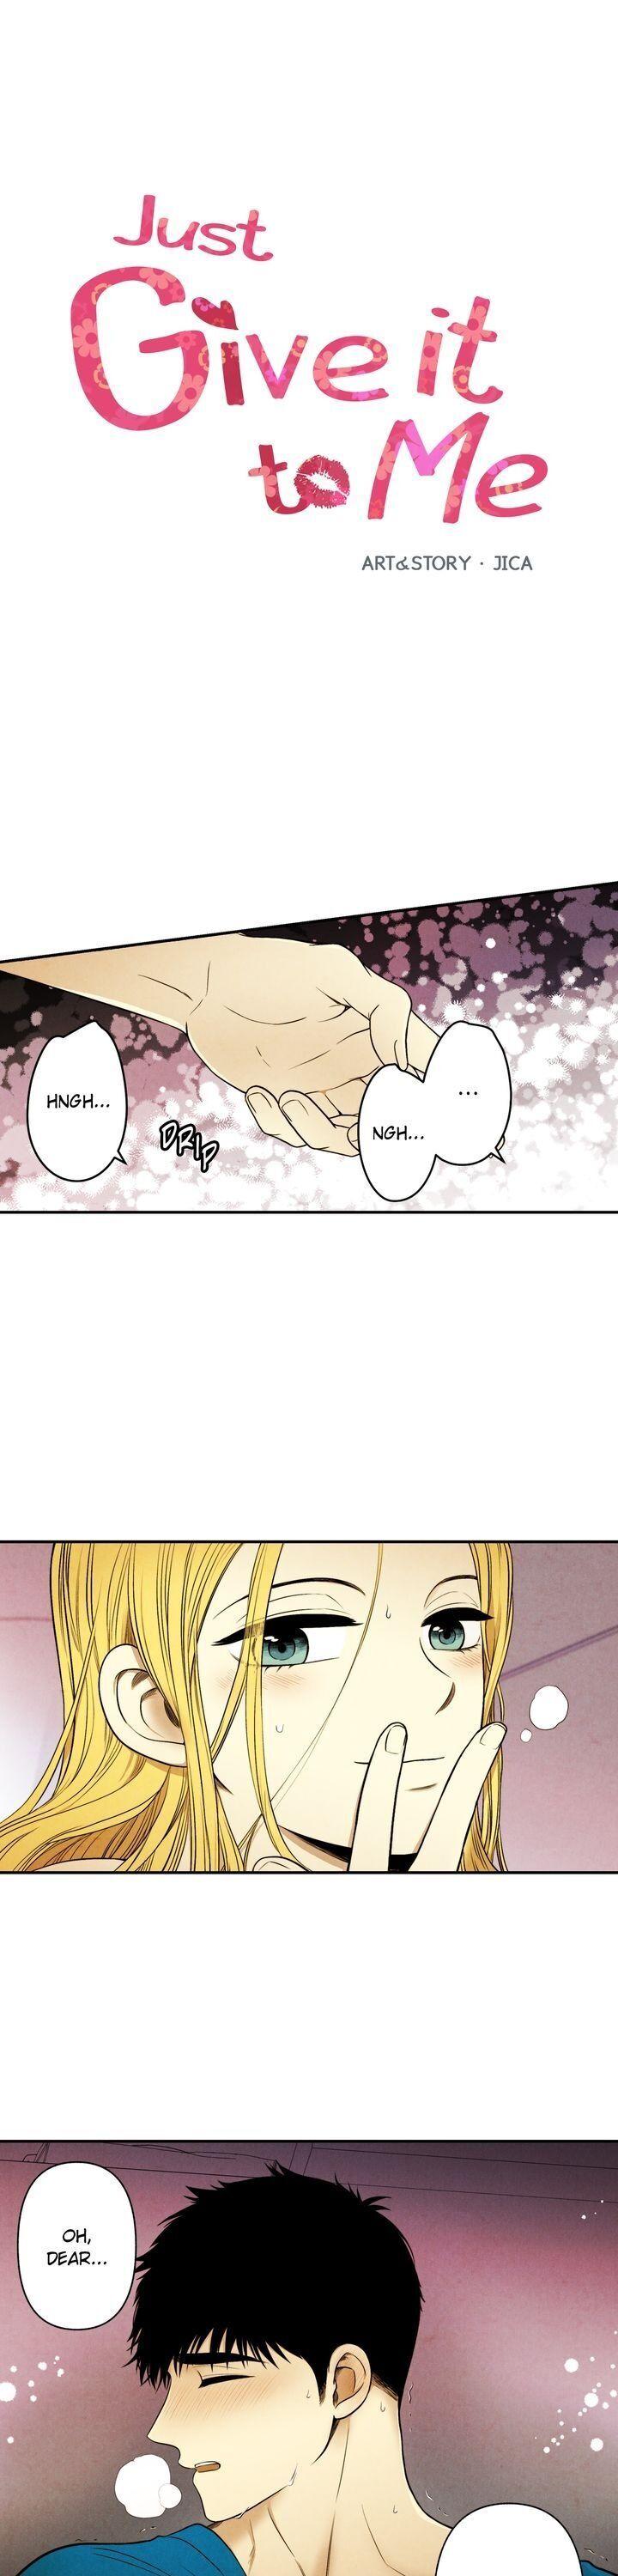 Just Give It To Me Manga Read Just Give It To Me Chapter 79 on Mangakakalot